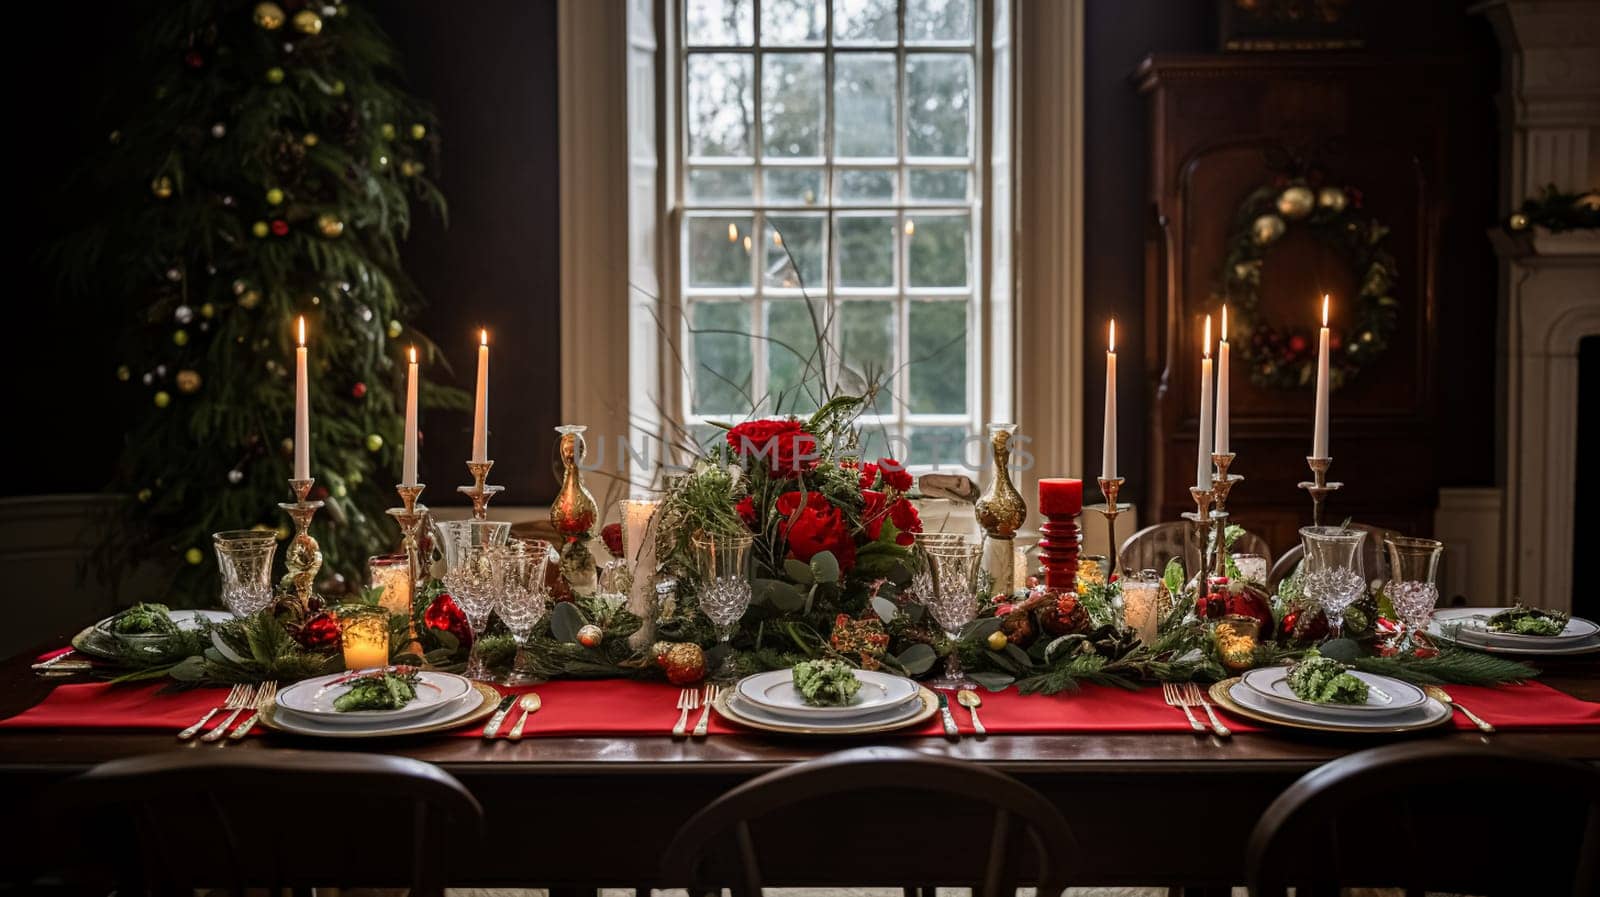 Christmas at the manor, holiday tablescape and dinner table setting, English countryside decoration and festive interior decor